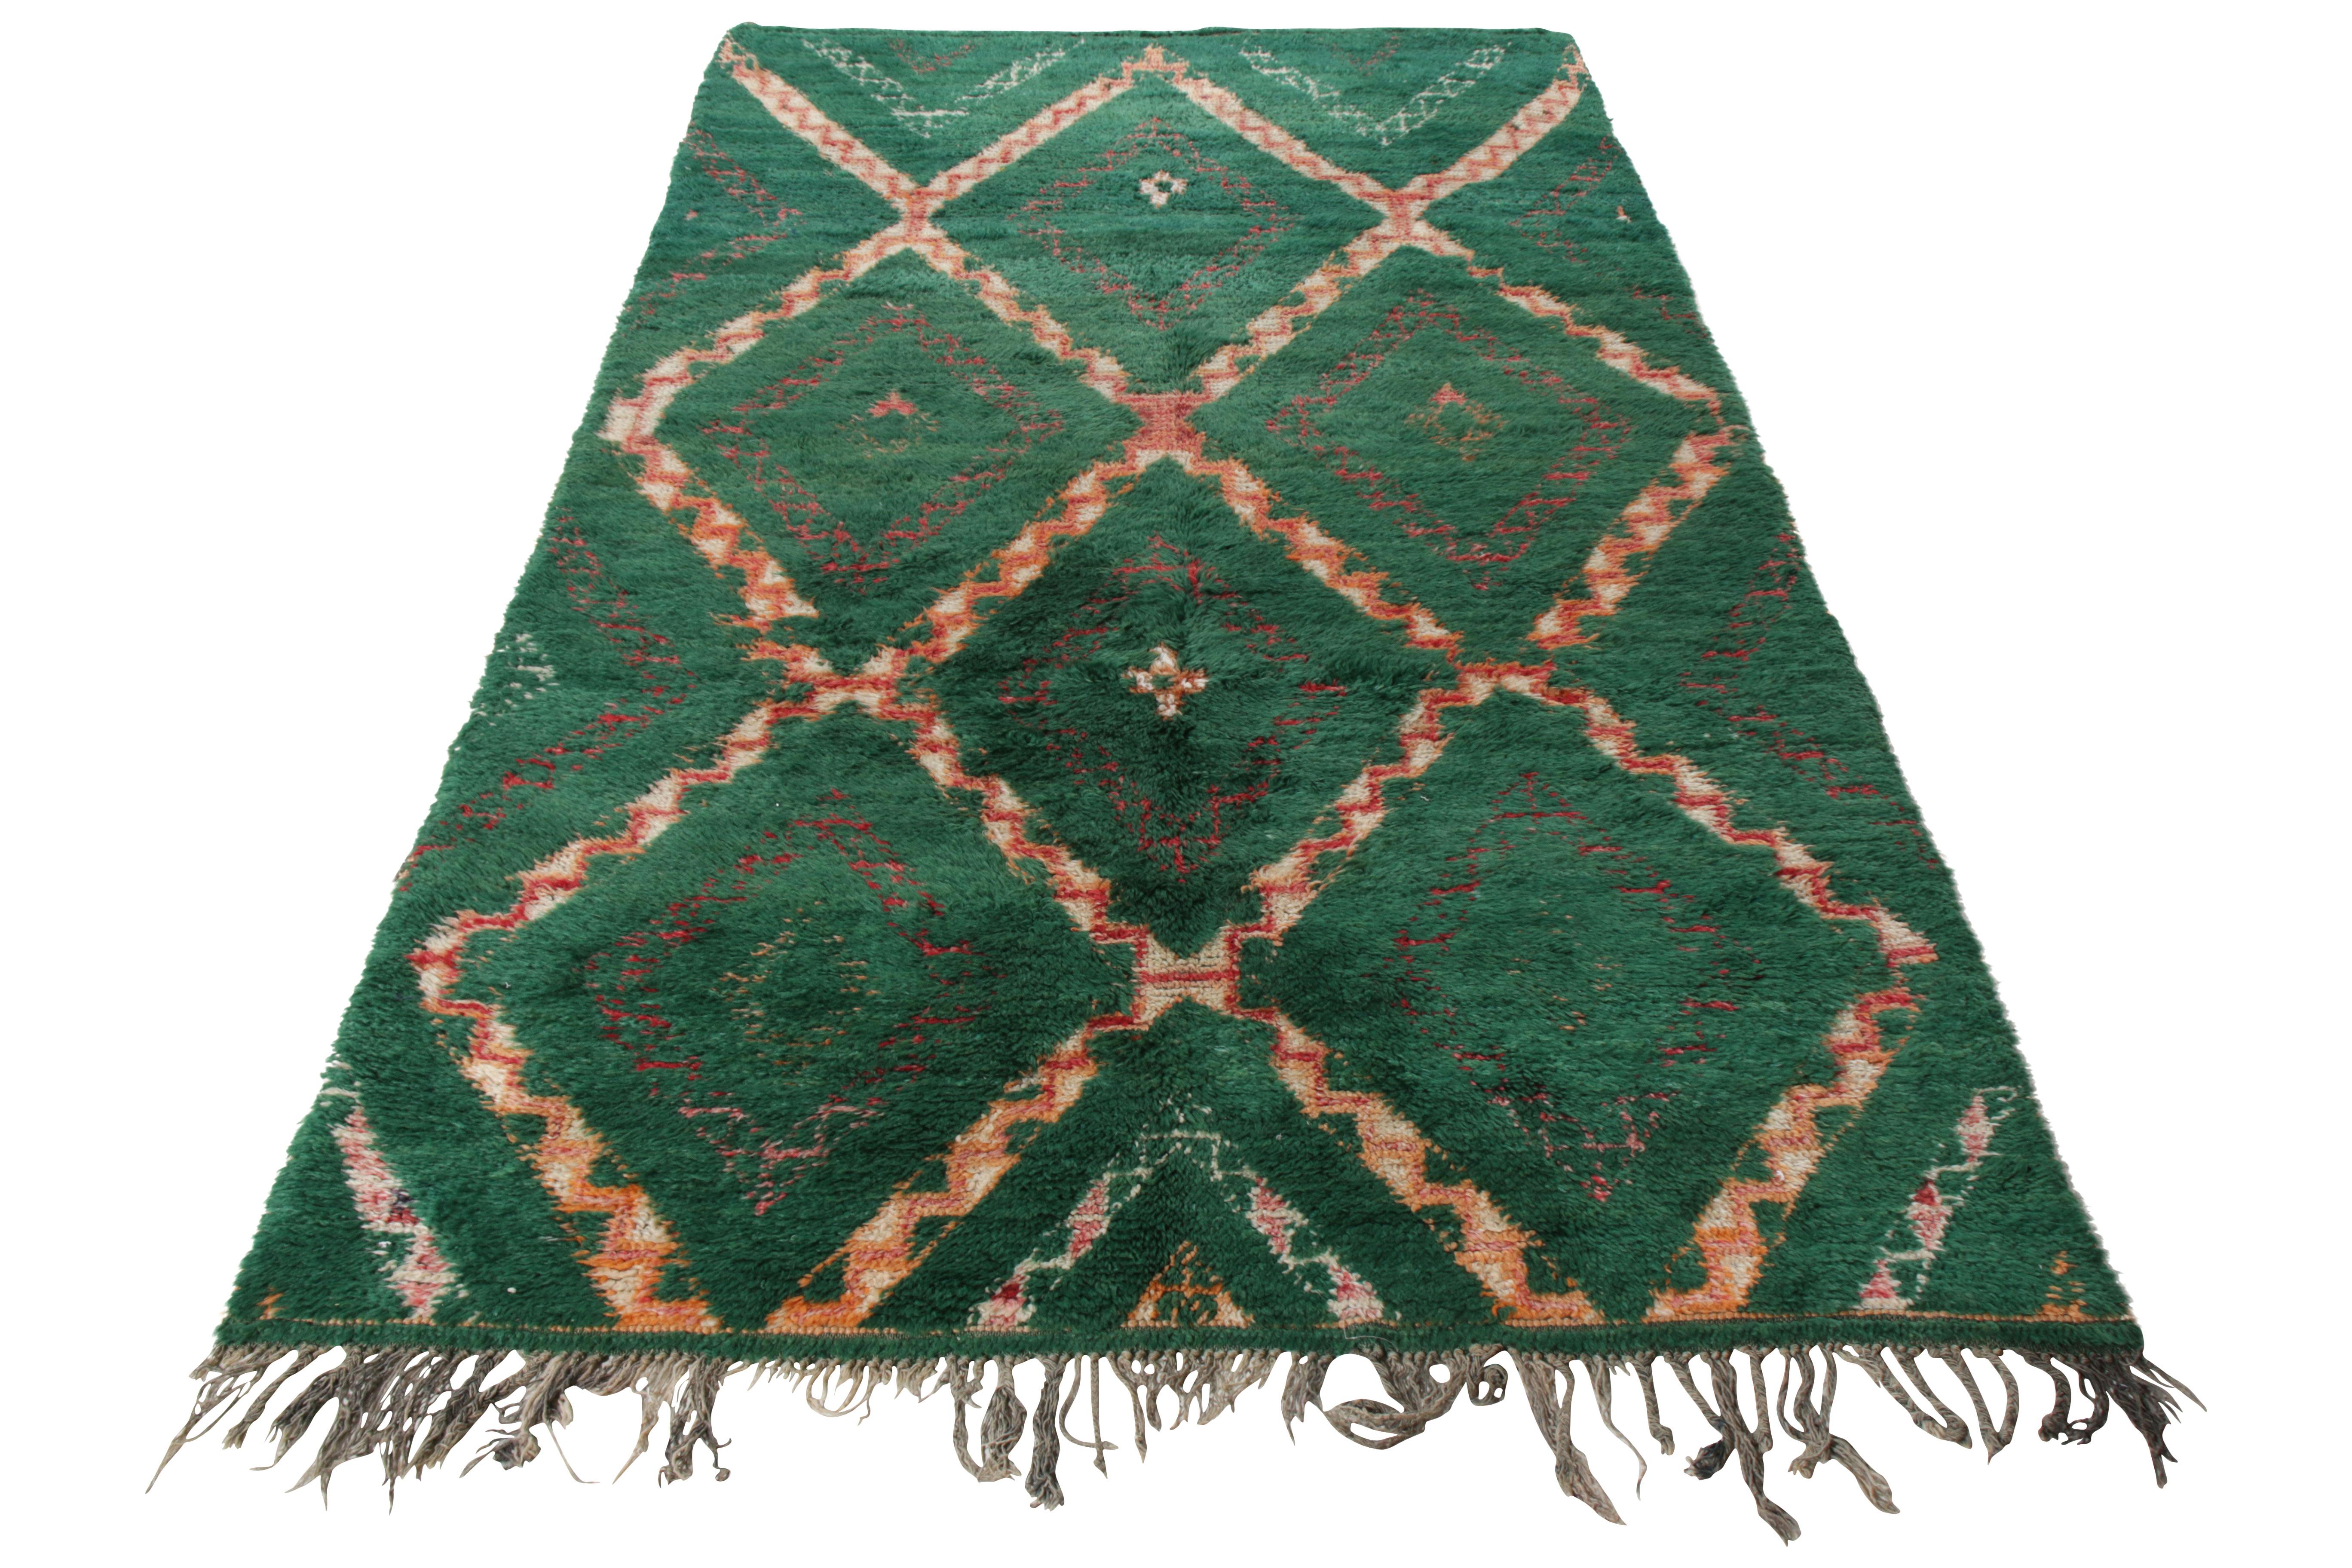 Hand knotted in lush wool pile, a 5x10 Berber style Moroccan runner joining Rug & Kilim’s diverse Moroccan rug collection. Originating circa 1950-1960, this piece enjoys a shag texture with a well defined geometric pattern in hues of green and